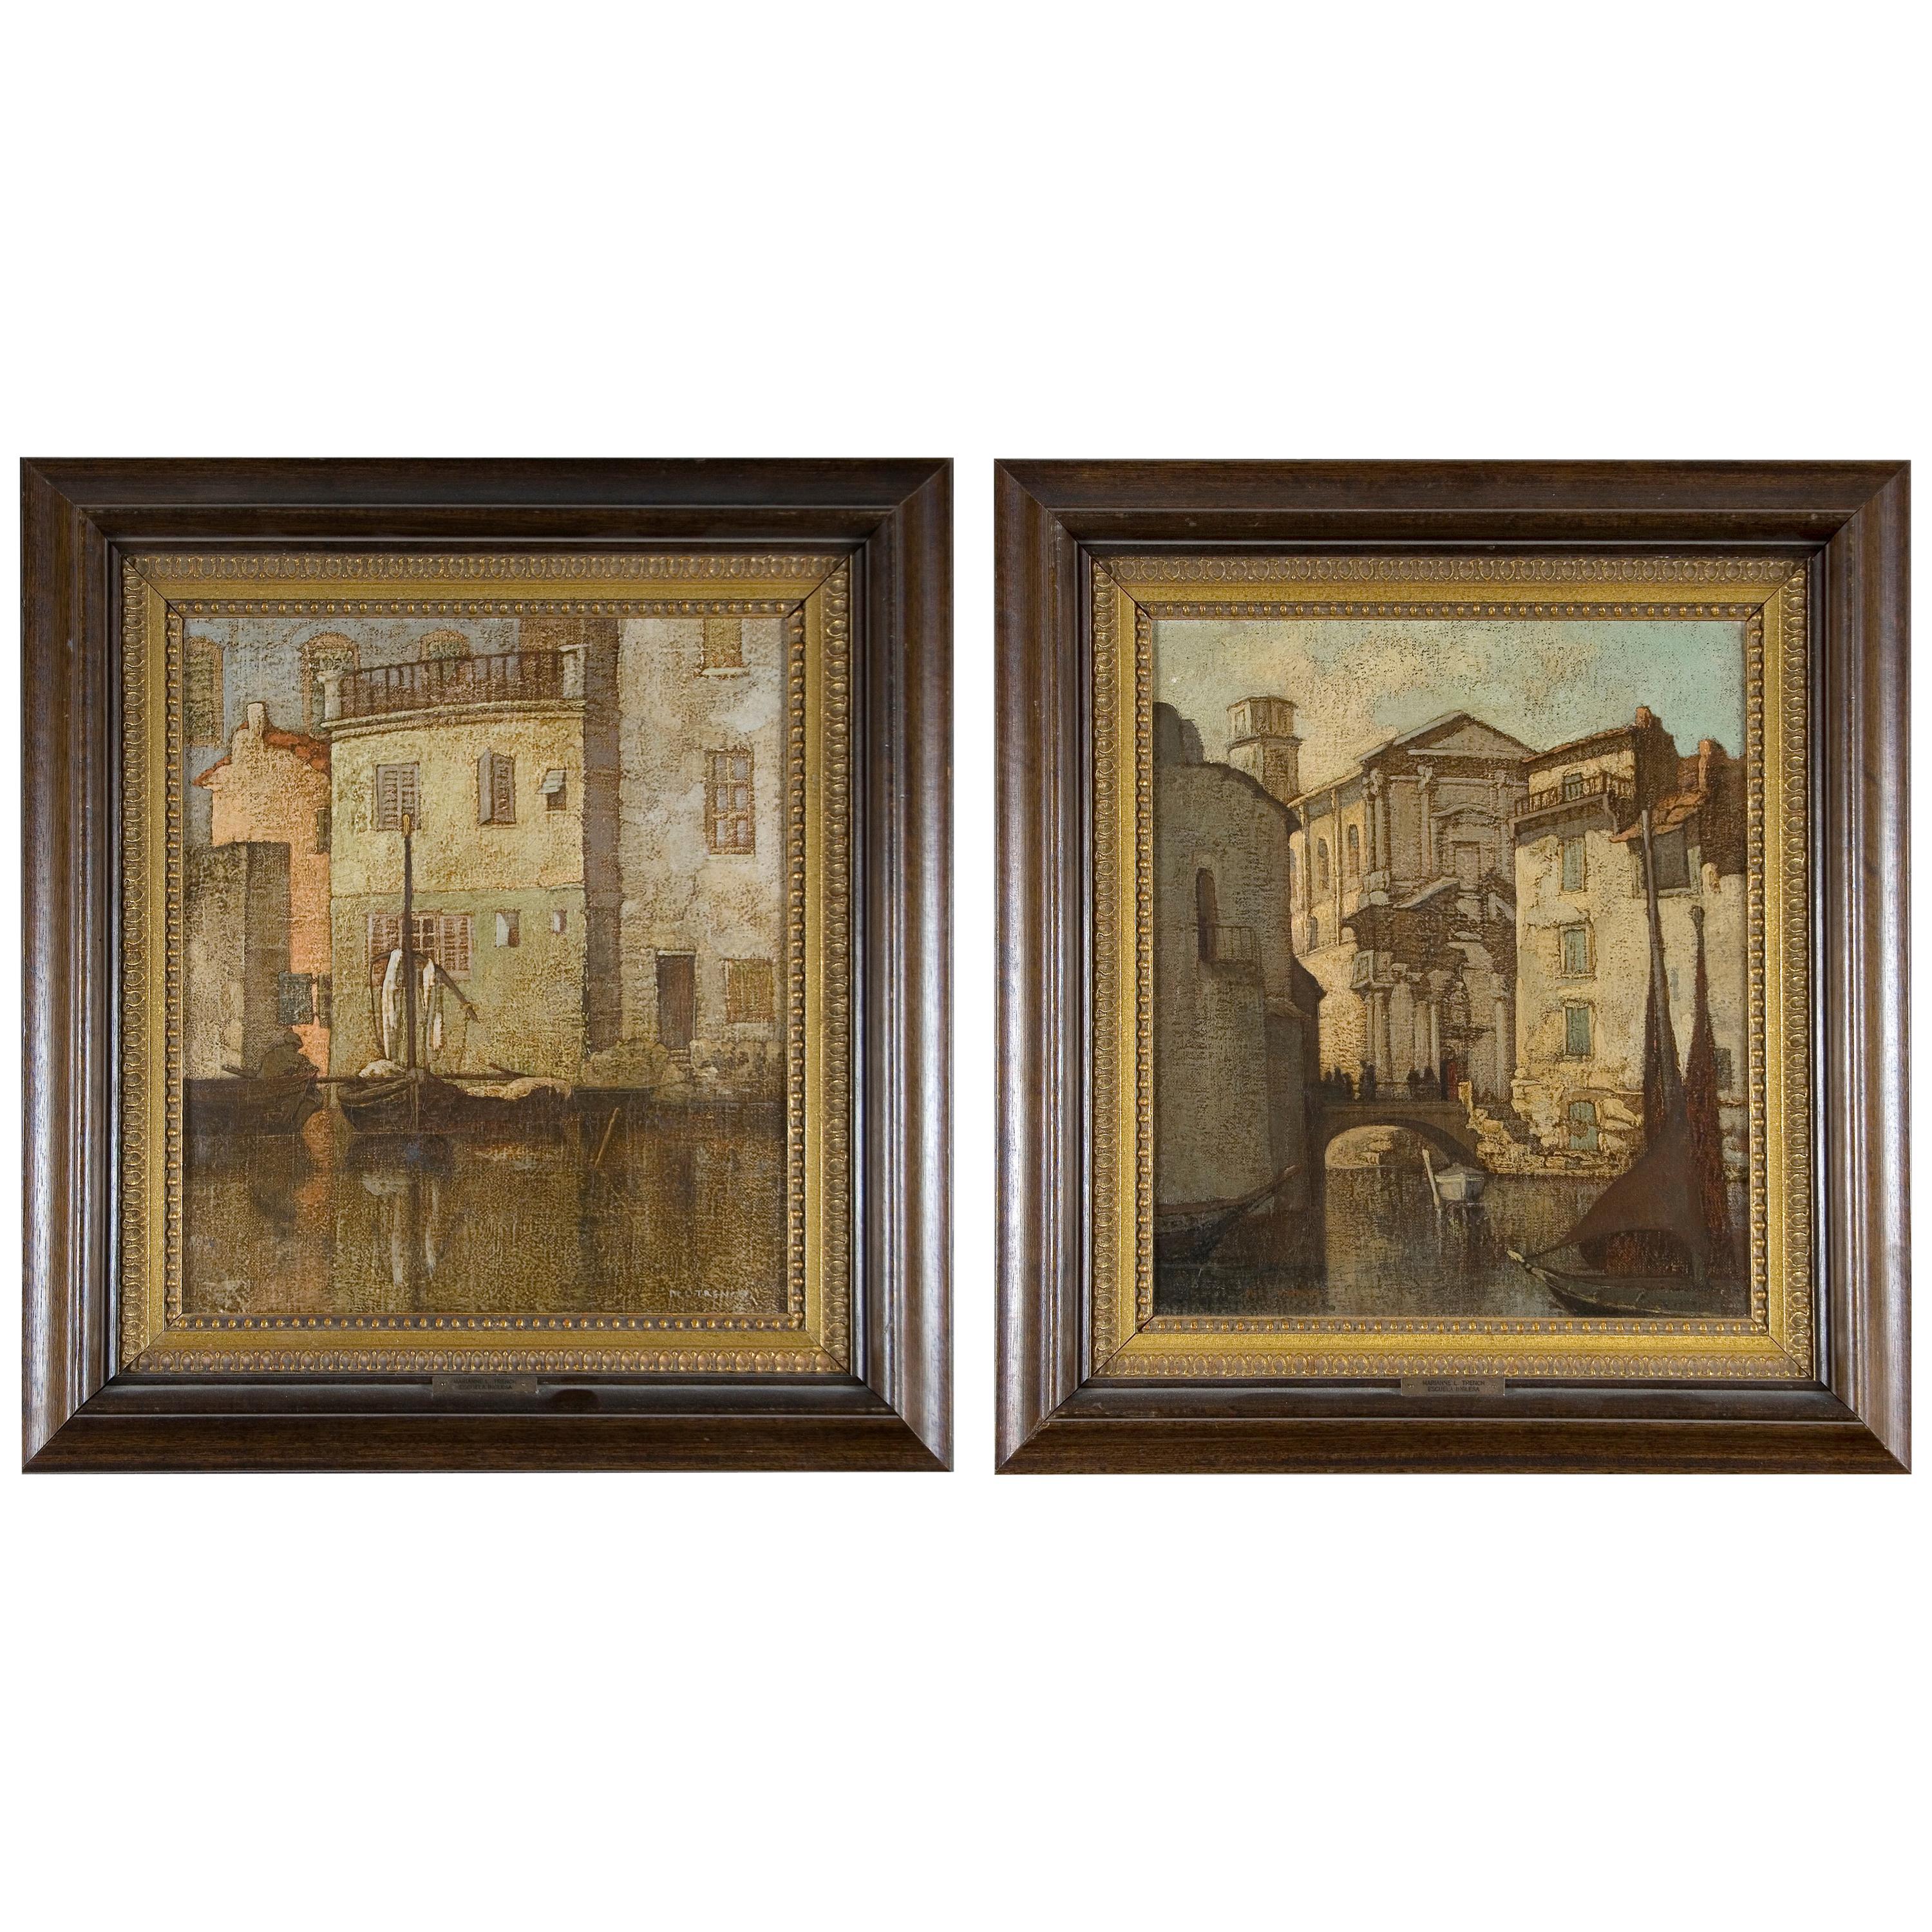 Pair of Urban Views, "Venice", Marianne Lucy Le Poer Trench 'England, 1888-1940' For Sale